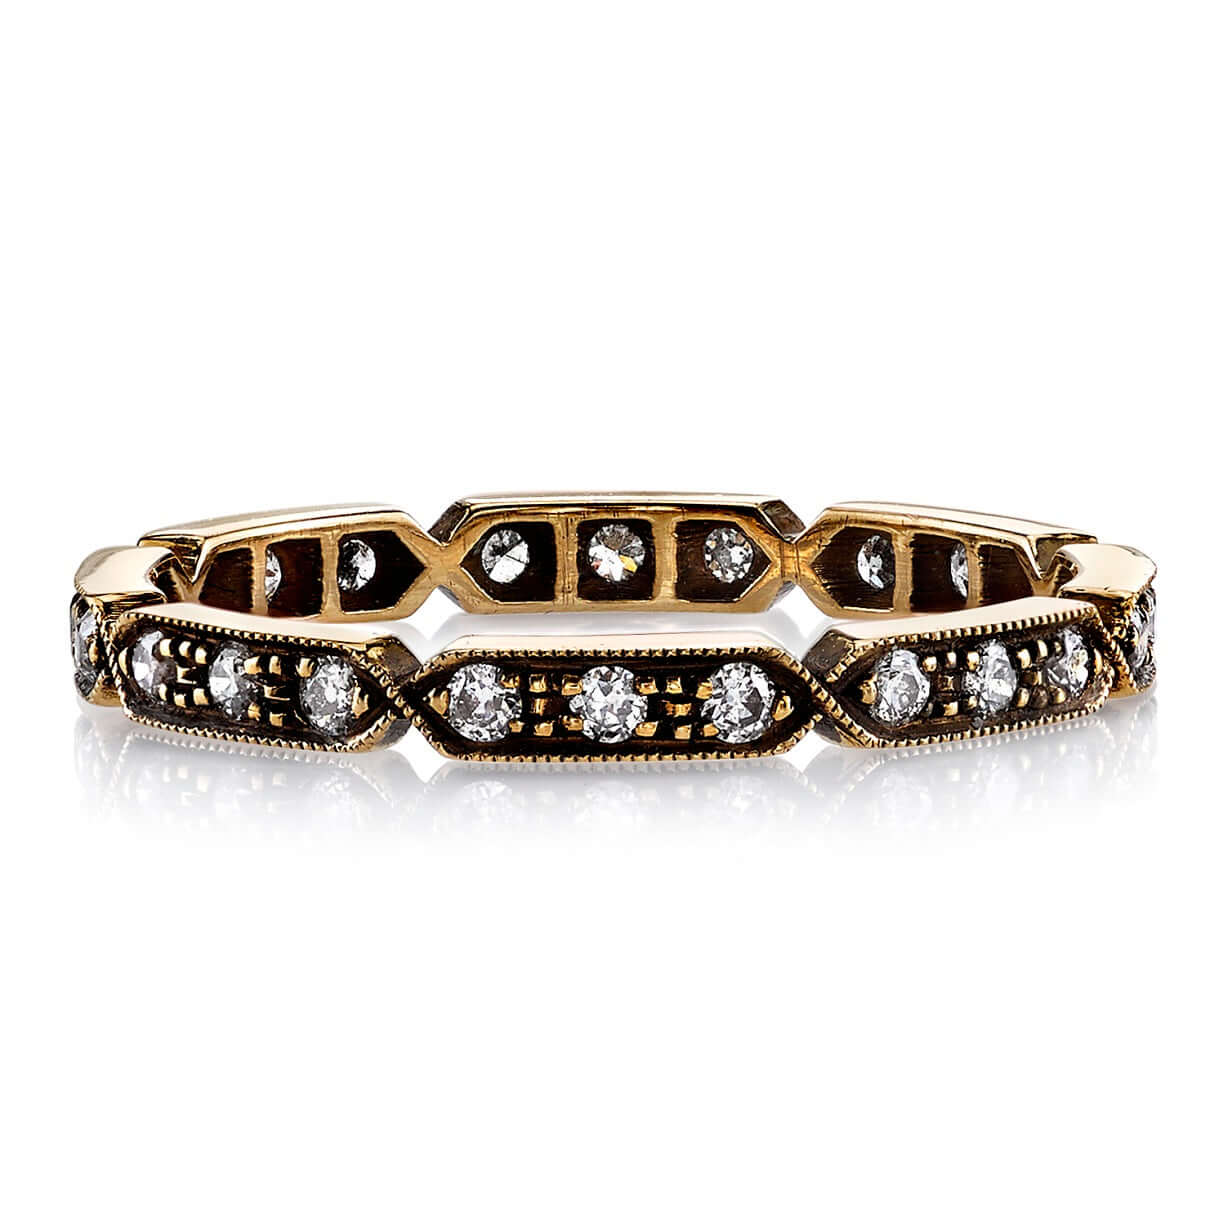 SINGLE STONE CARLY BAND | Approximately 0.30ctw G-H/VS old European cut diamonds prong set in a handcrafted geometric sectional eternity band. Approximate band width 2.1mm. Please inquire for additional customization.